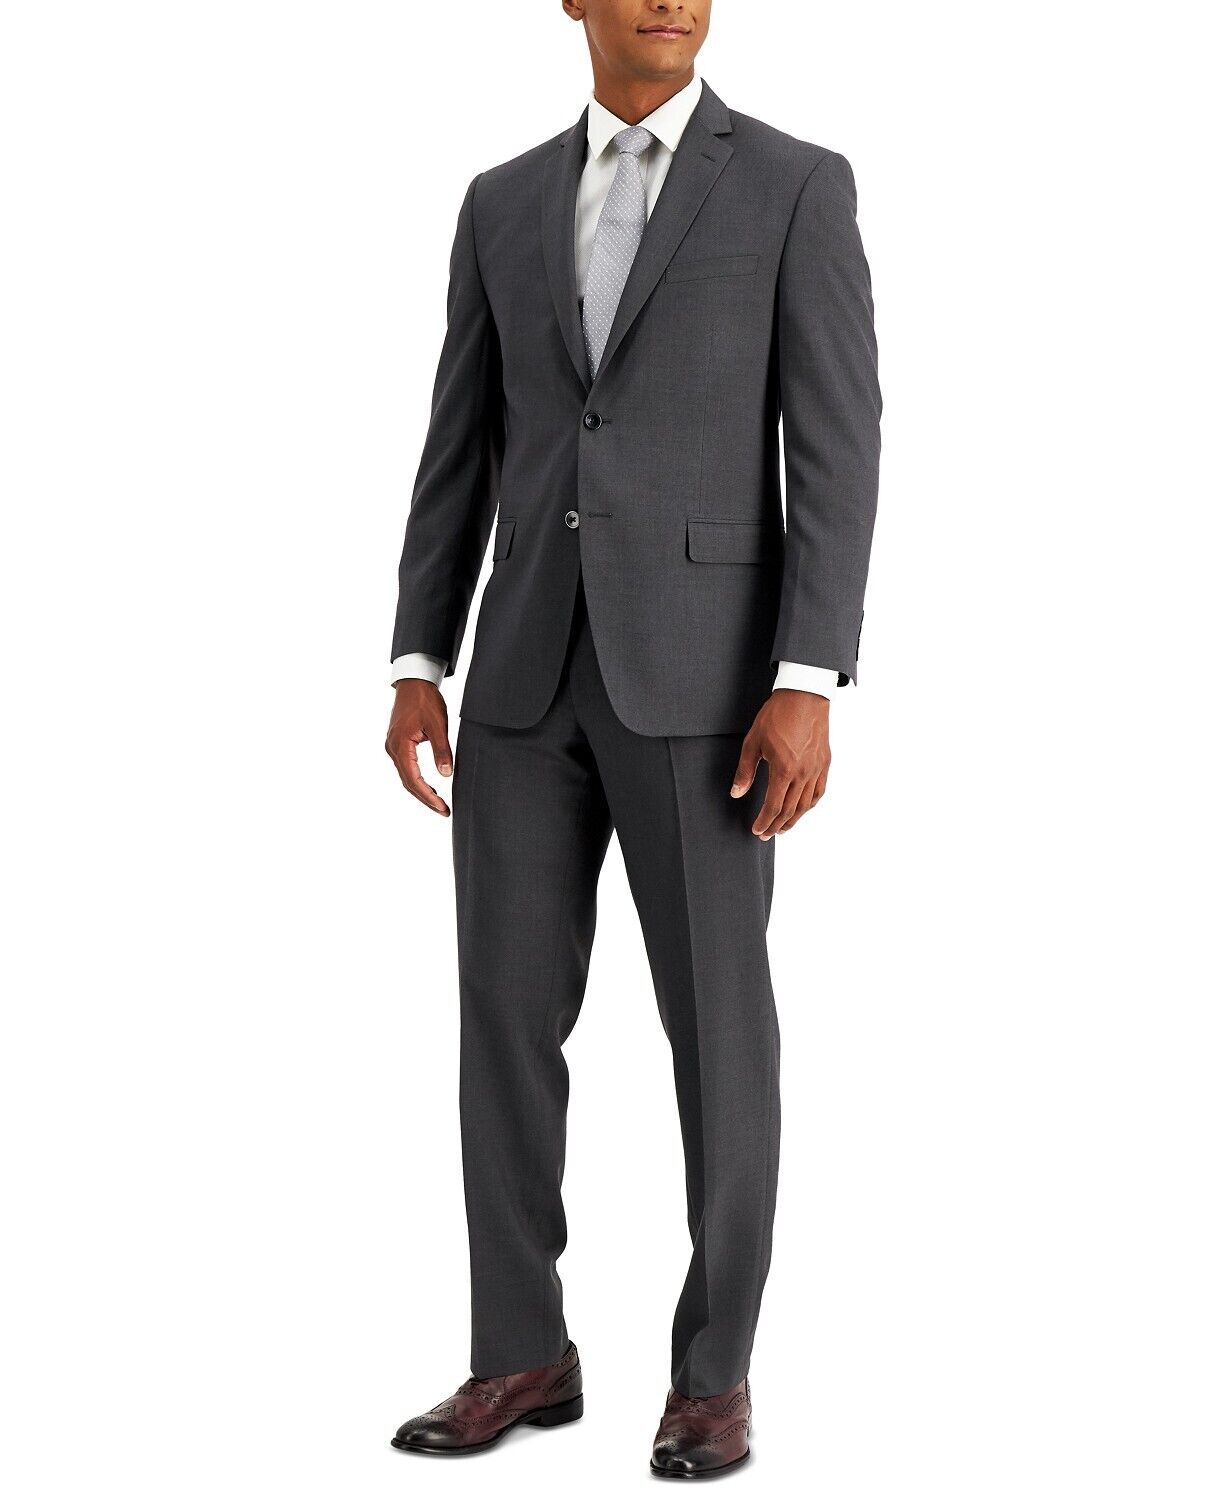 Marc New York by Andrew Marc Men's Modern-Fit Suit Jacket 44S Charcoal Grey